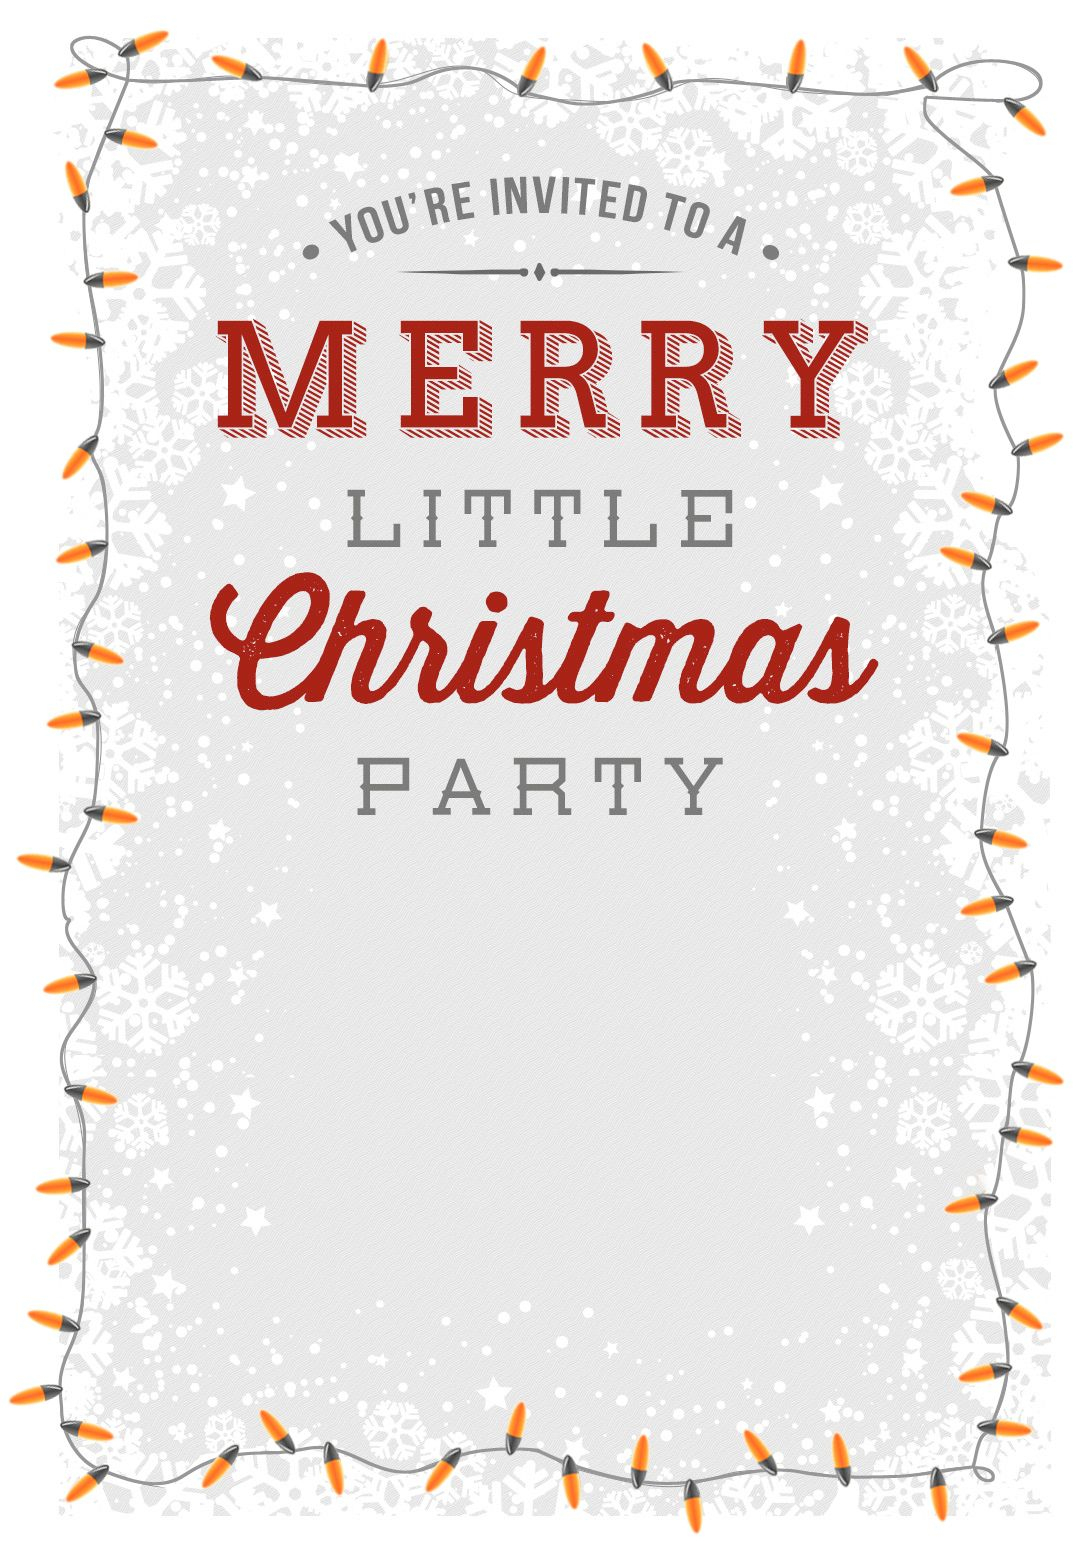 A Merry Little Party - Free Printable Christmas Invitation Template - Christmas Party Invitation Templates Free Printable